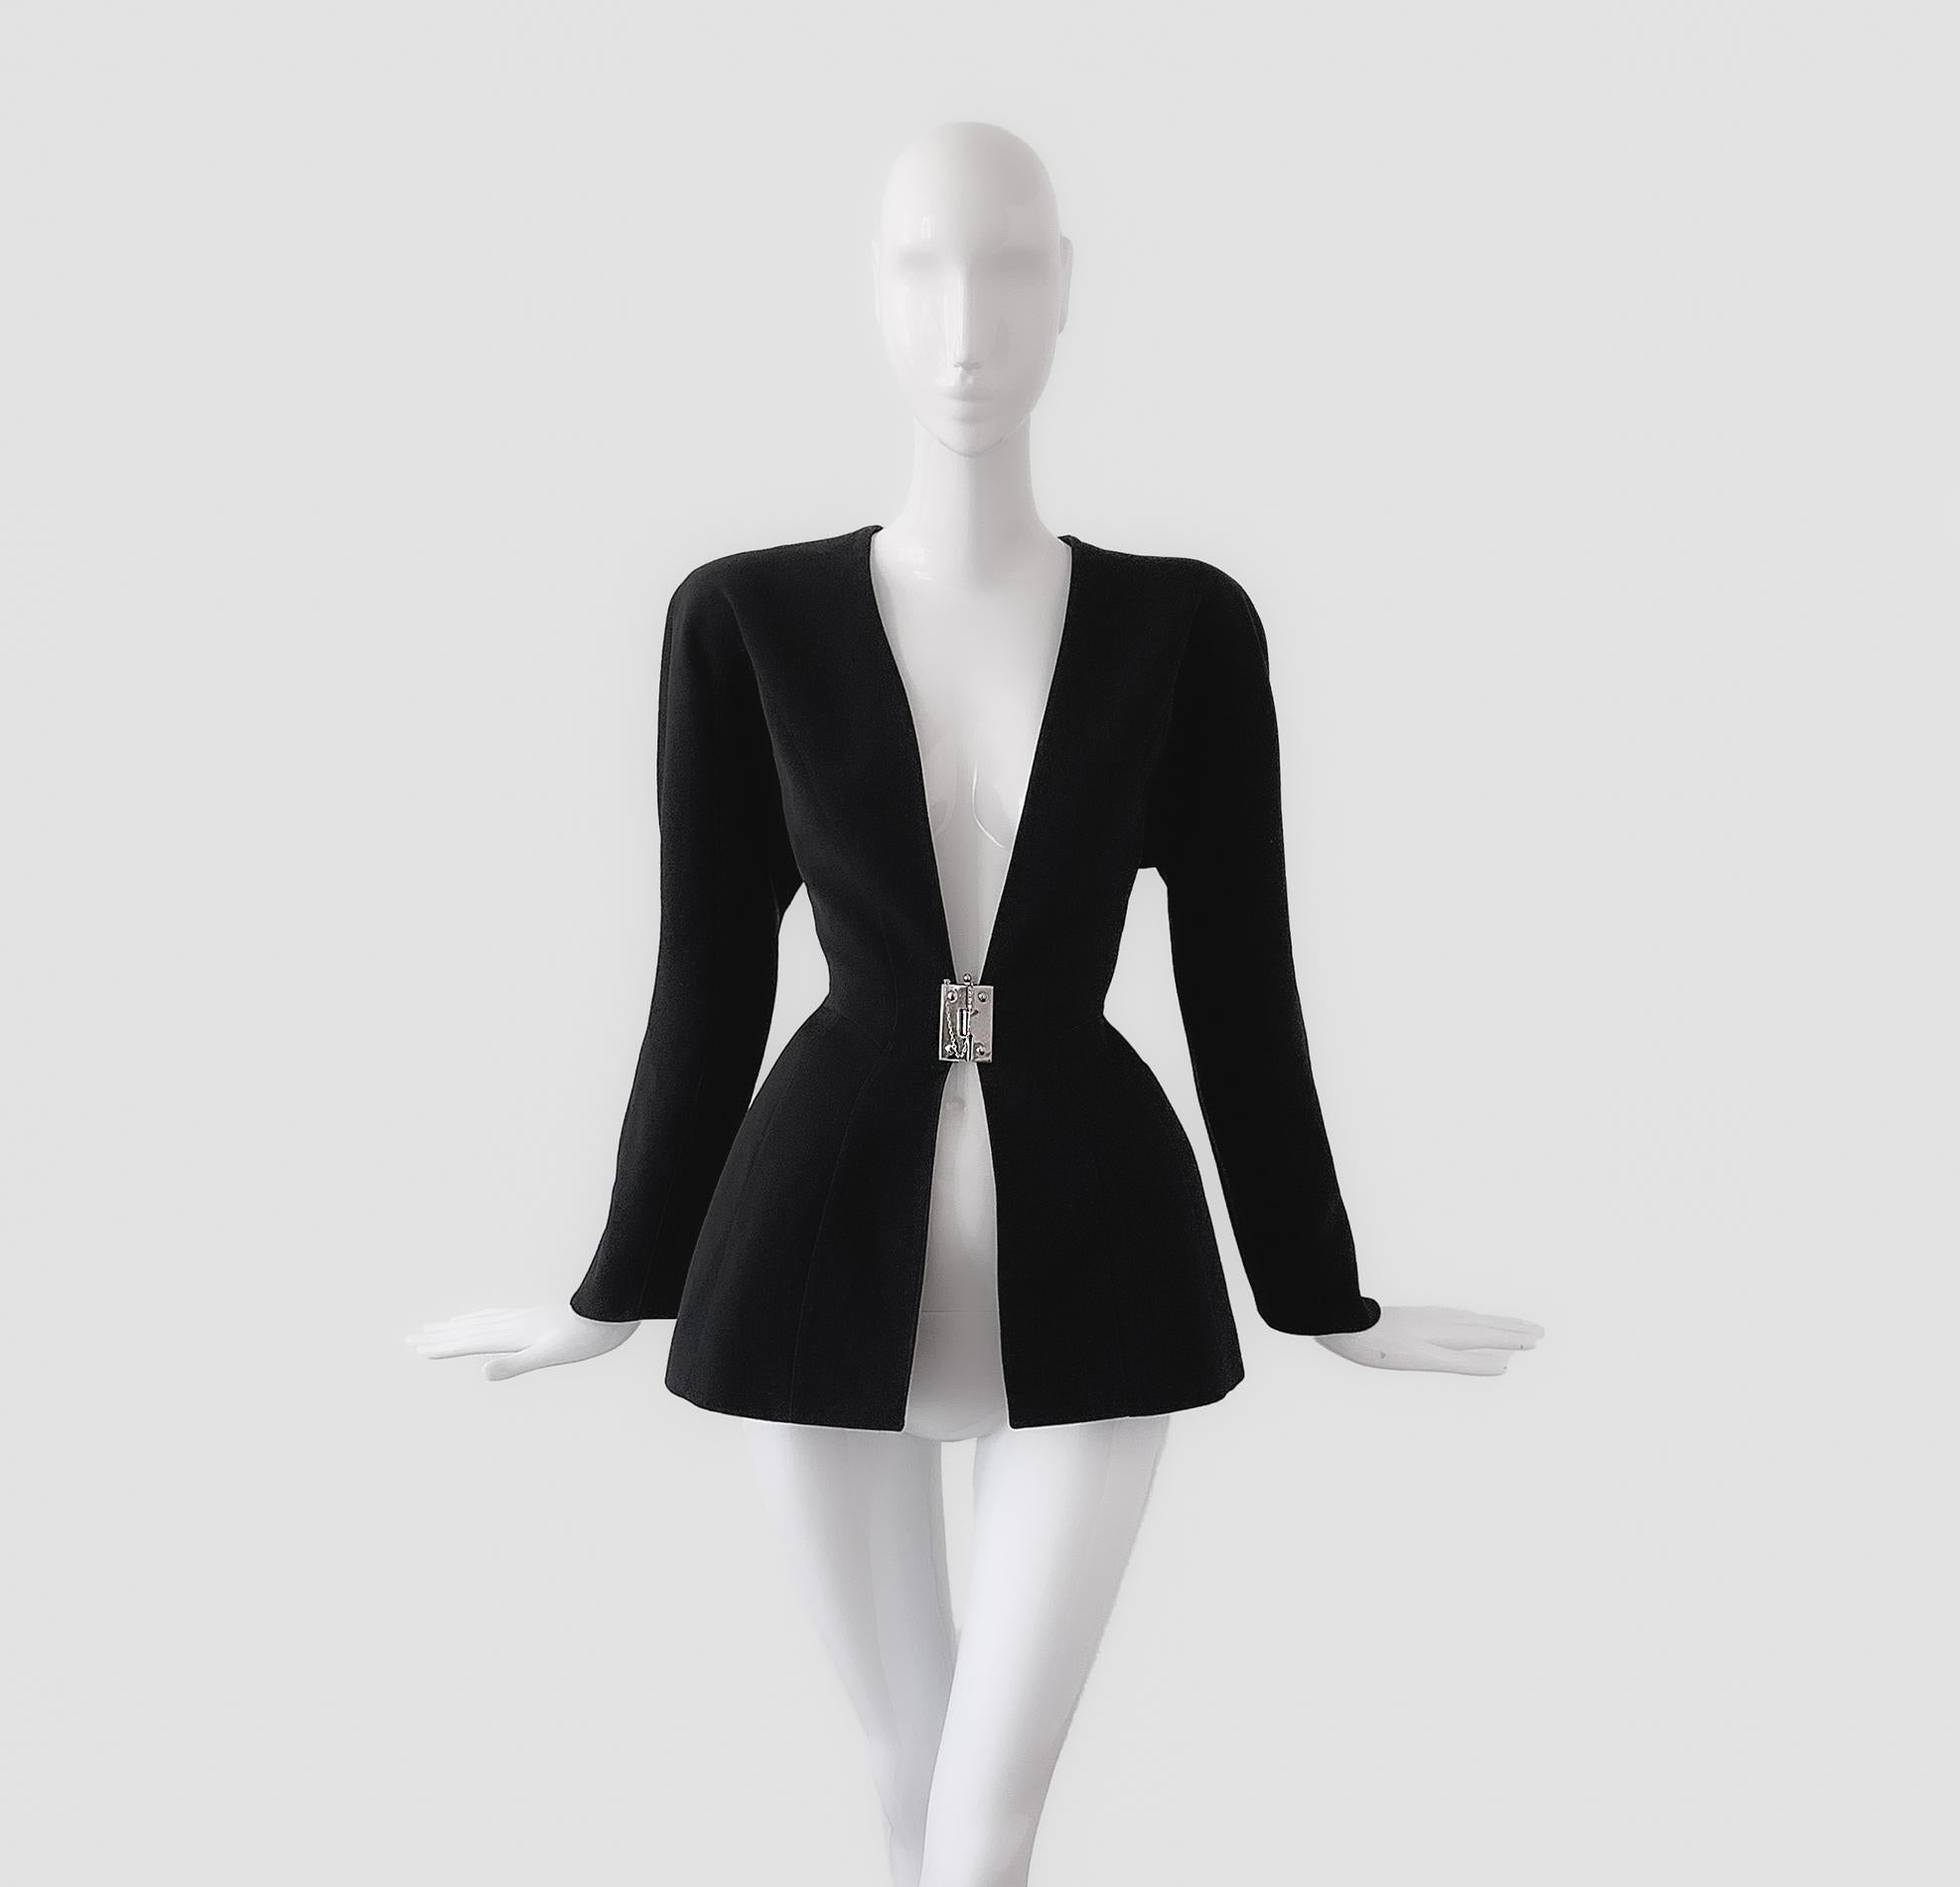 
Stunning extraordinairy MUGLER blazer. This is giving strong femme fatale & Helmut Newton photography vibes. Very rare Mugler ceration with silver metal padlock closure. Black wool jacket with deep V-neck and FABULOUS unique closure.
Typical